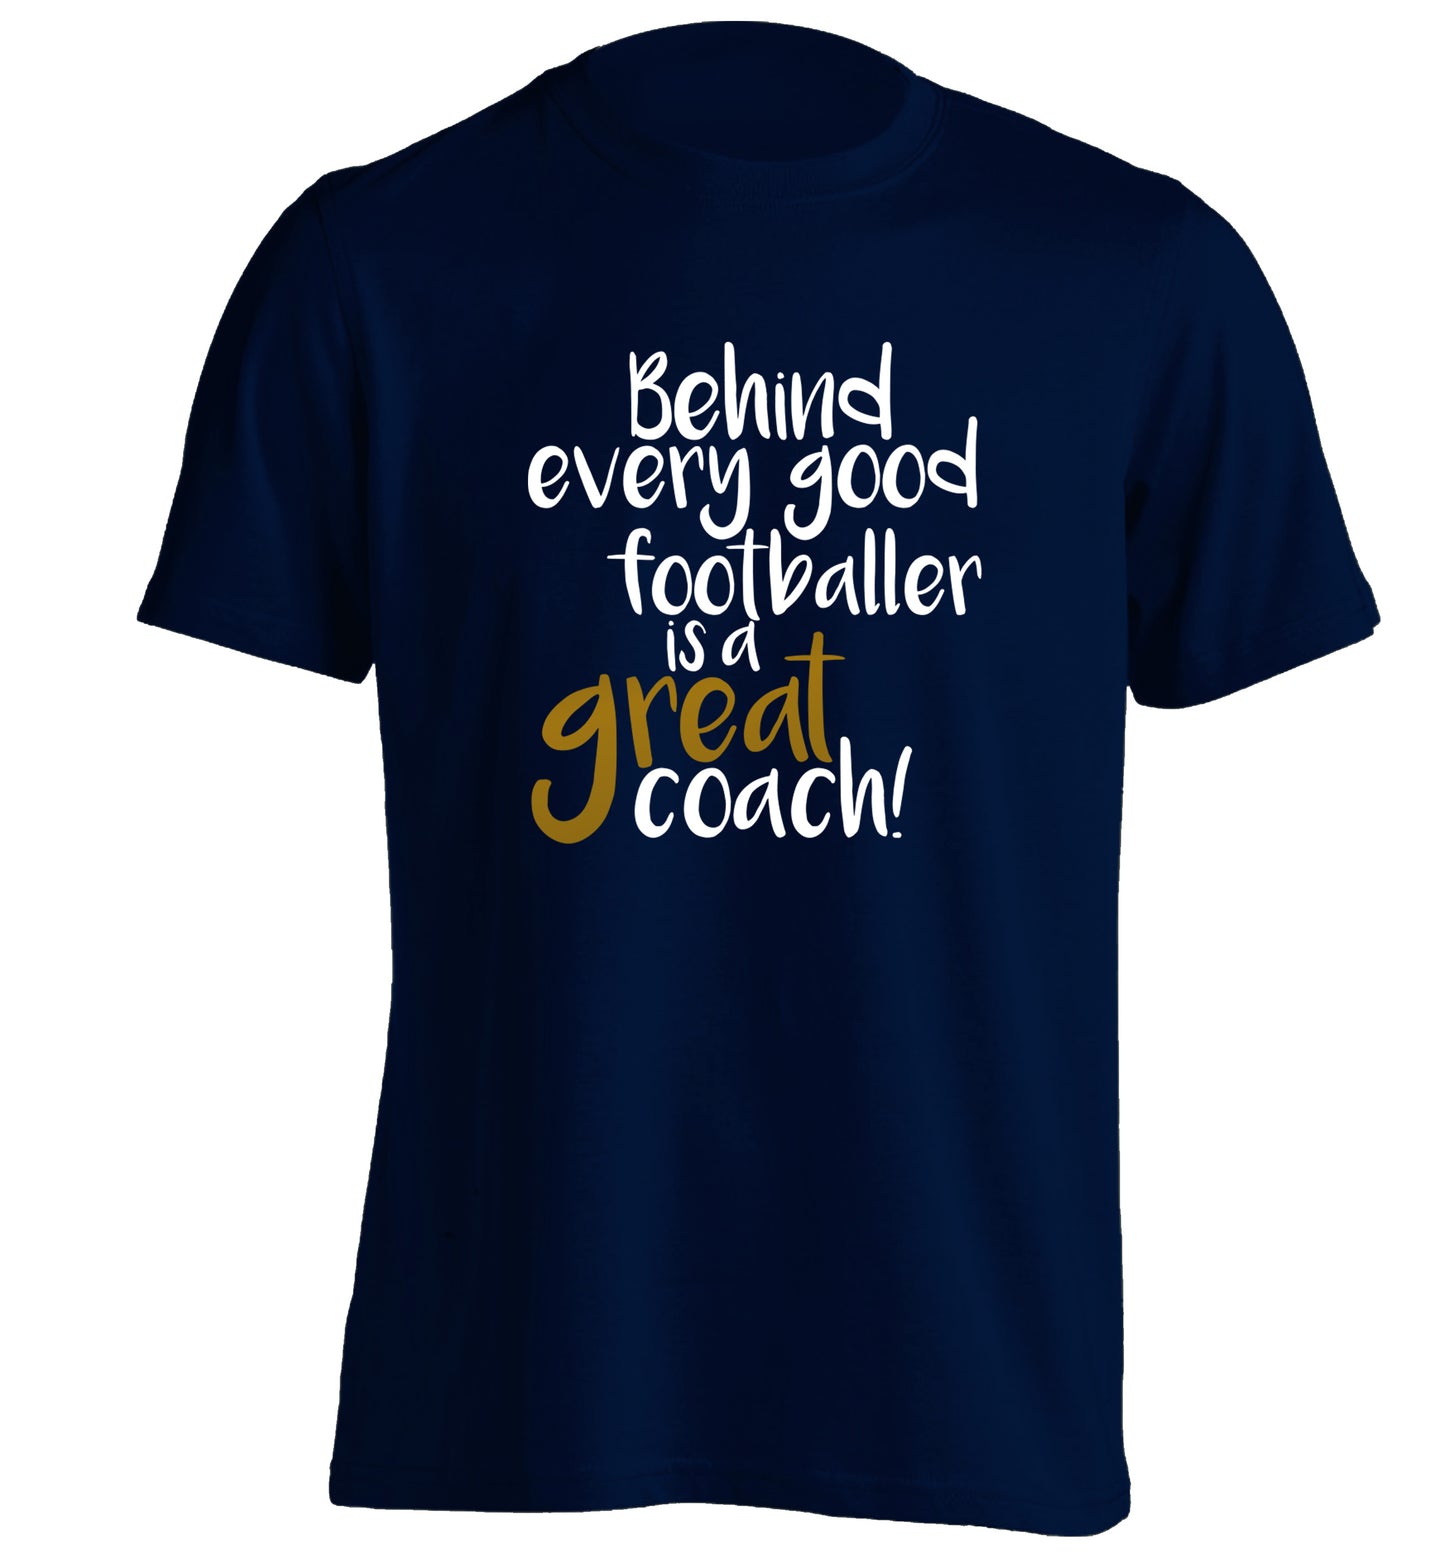 Behind every good footballer is a great coach! adults unisexnavy Tshirt 2XL